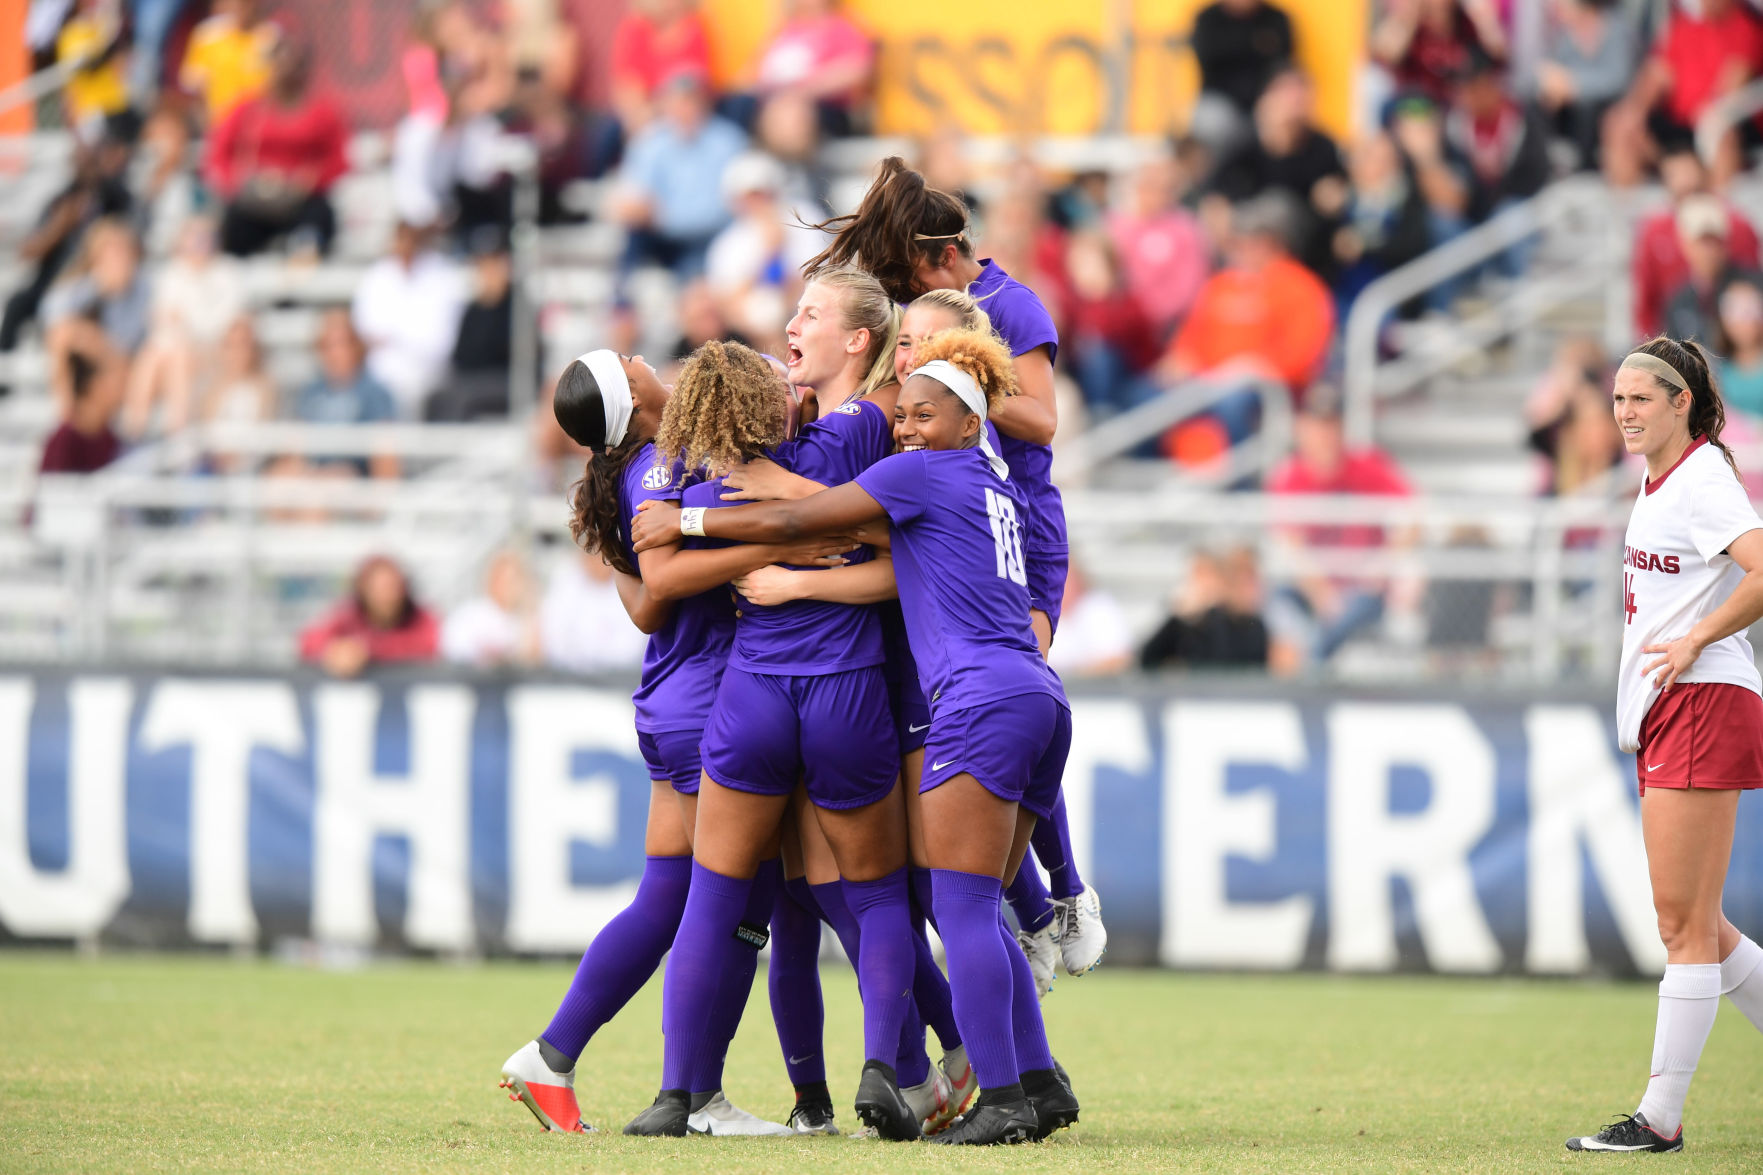 Dramatic late goal helps LSU soccer top 